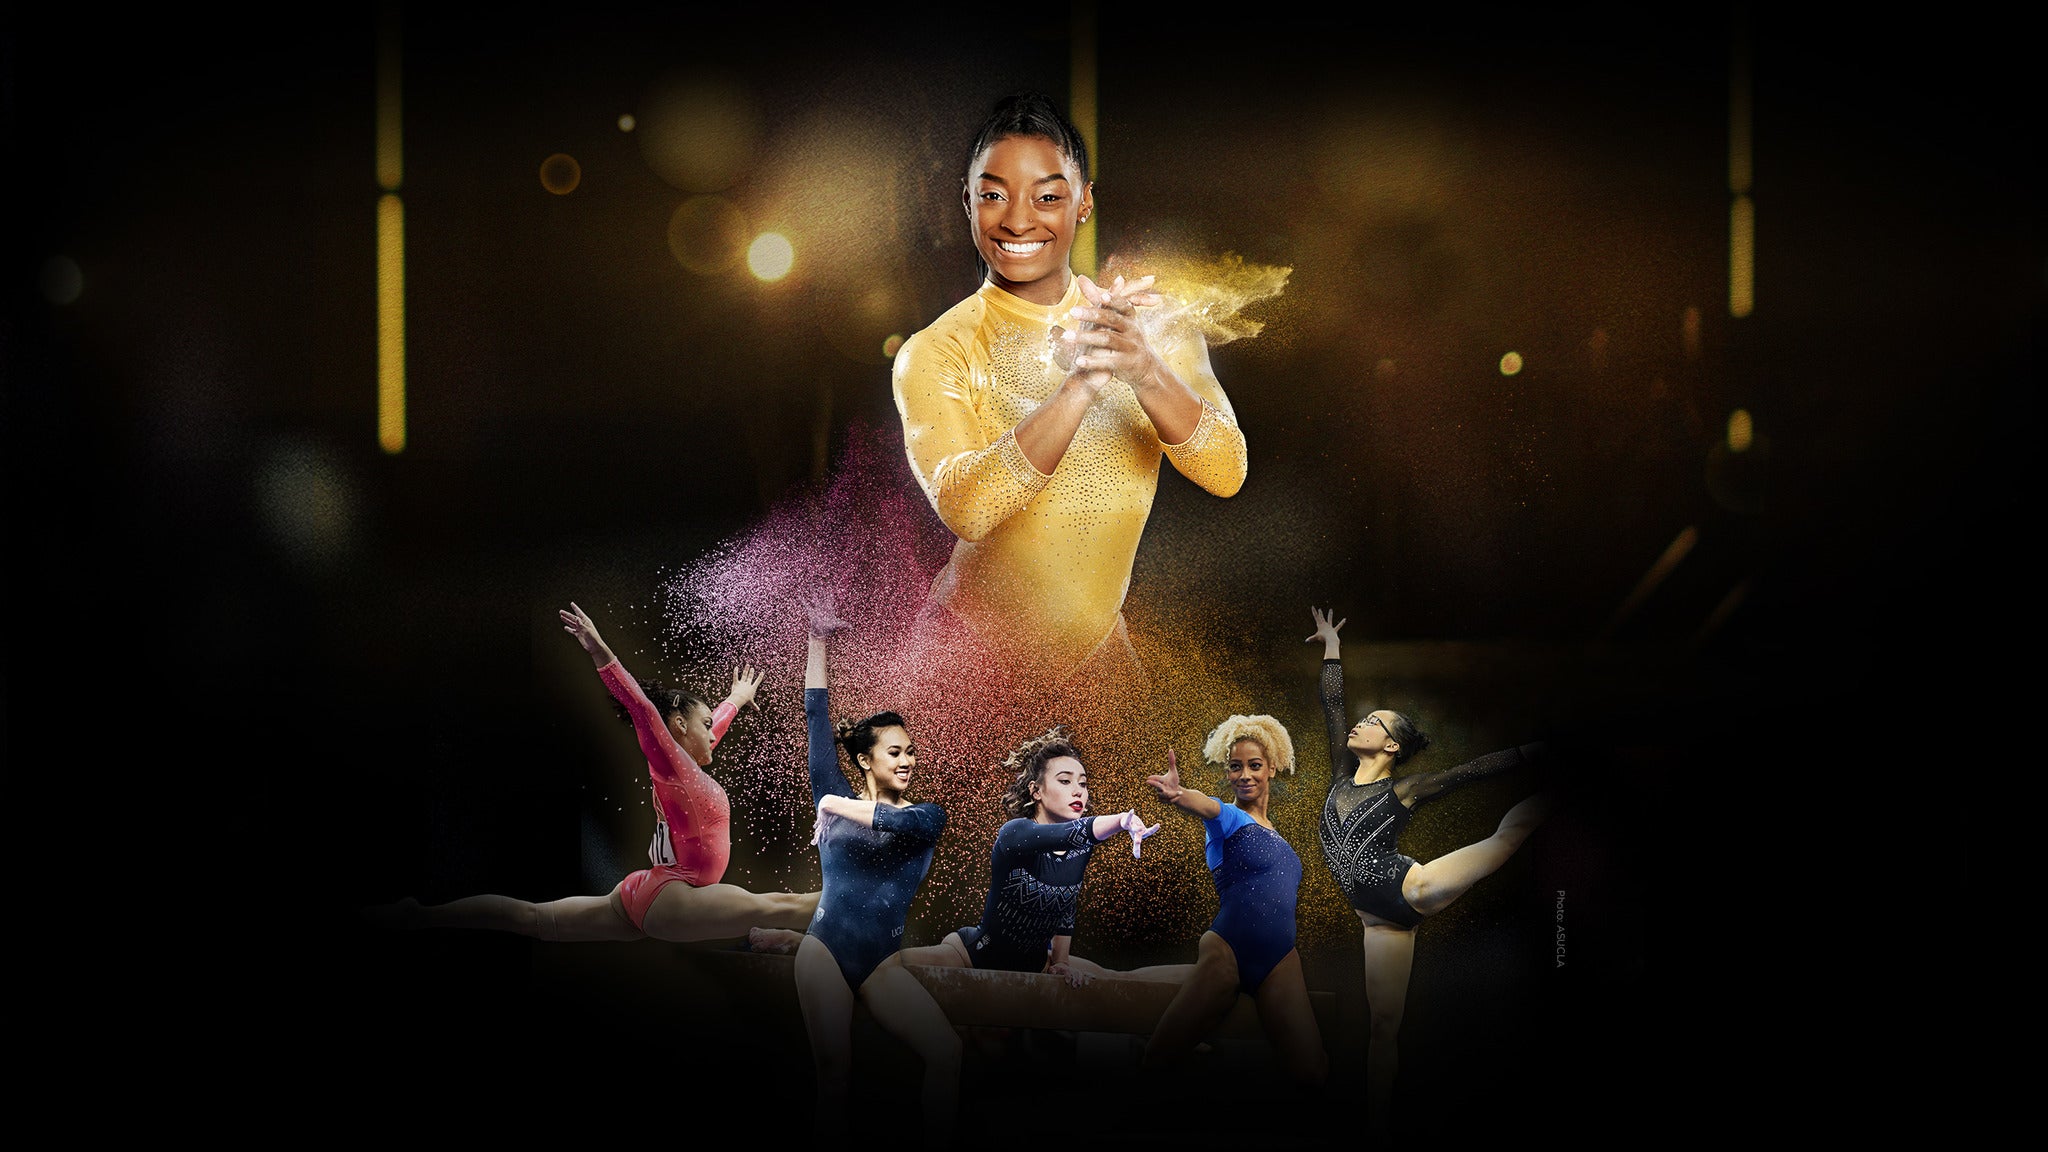 G.O.A.T. Gold Over America Tour Starring Simone Biles in North Little Rock promo photo for Official Platinum presale offer code